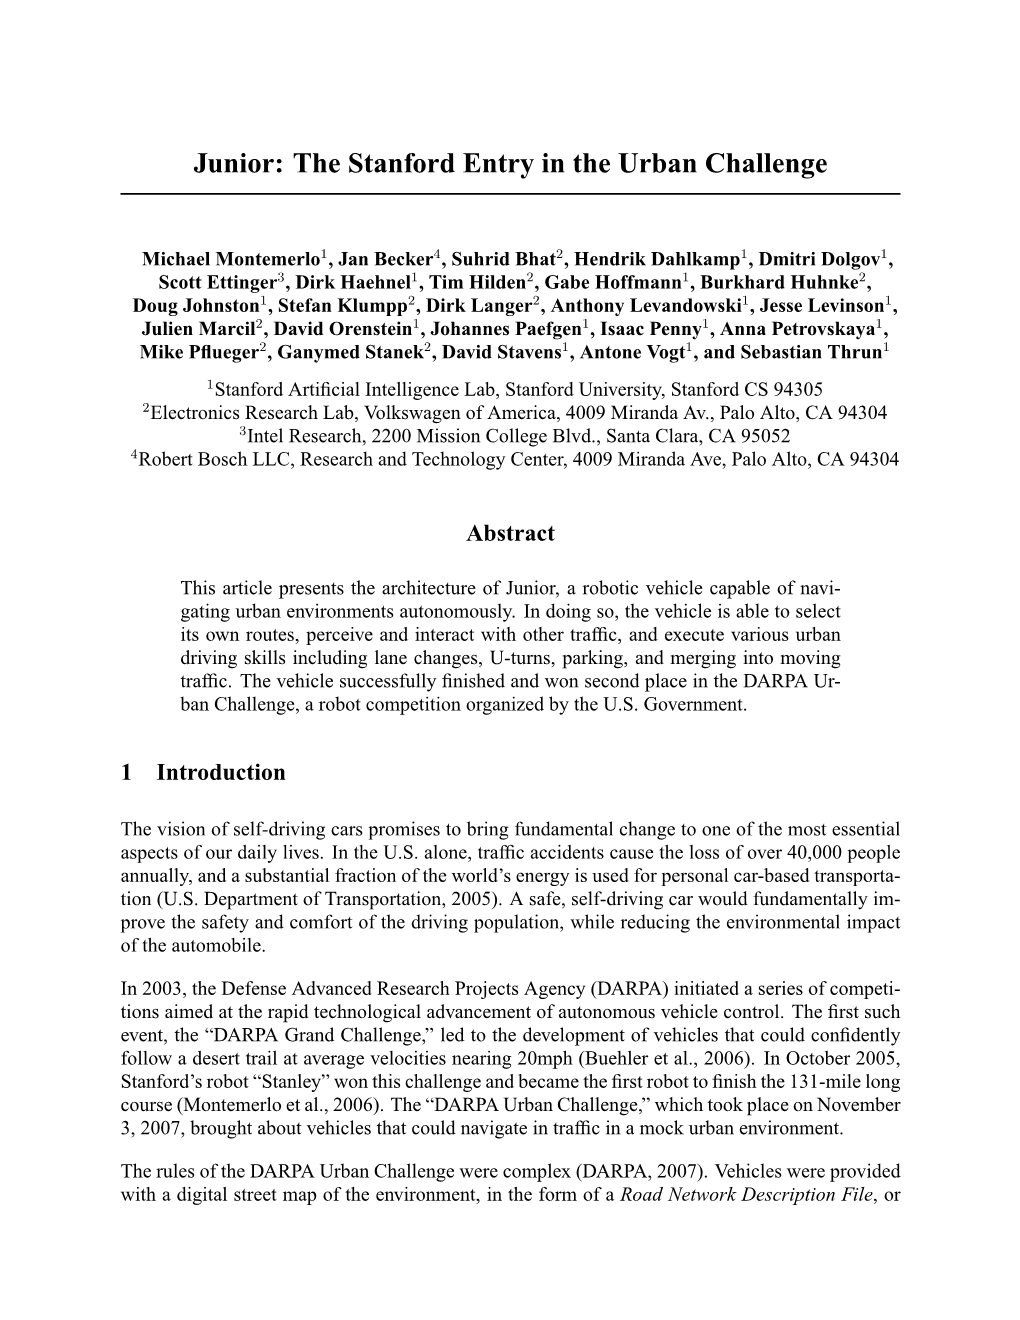 Junior: the Stanford Entry in the Urban Challenge